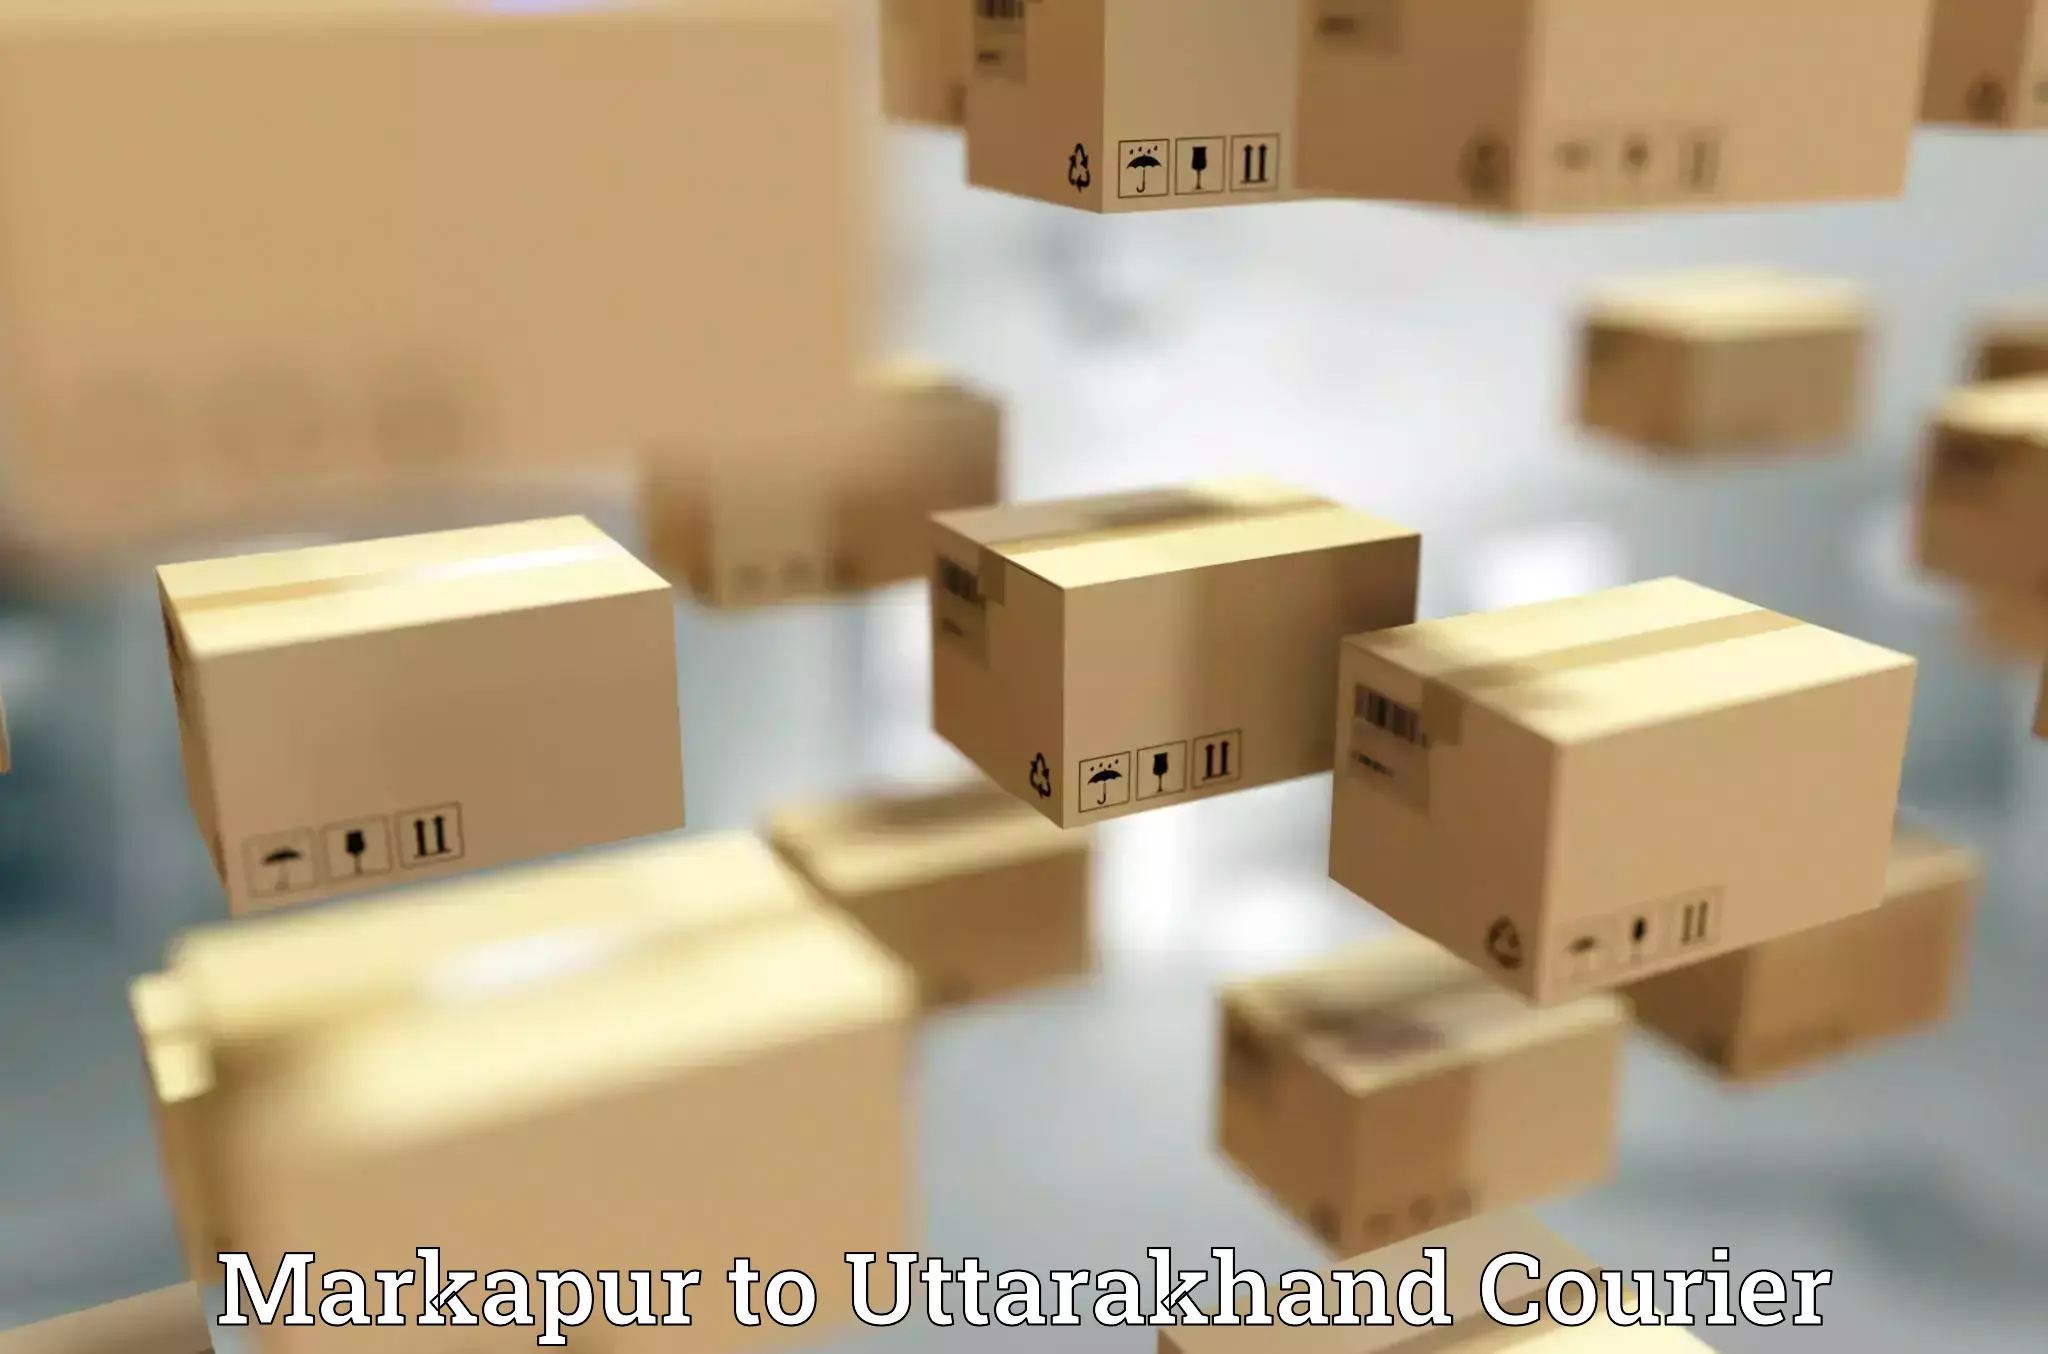 High-speed parcel service Markapur to Rudrapur